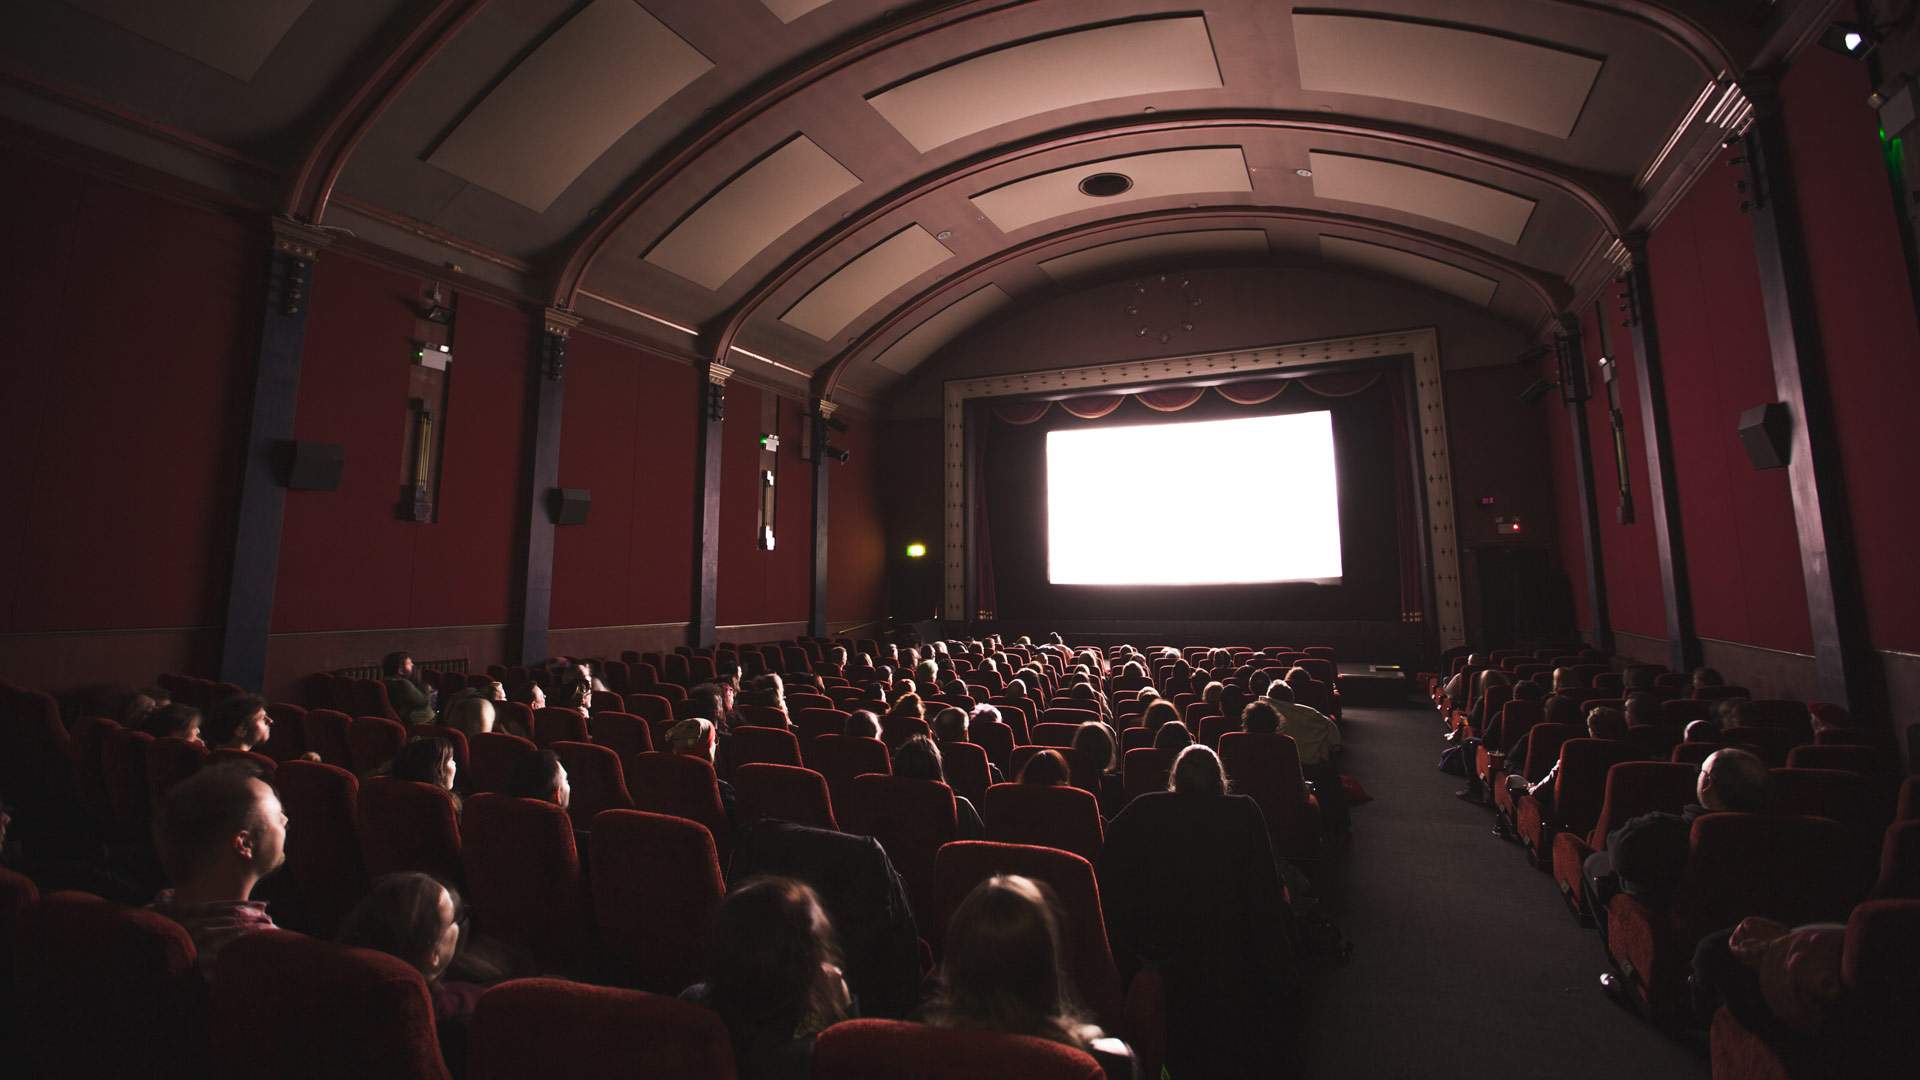 Australian Cinemas Are Aiming to Reopen in July